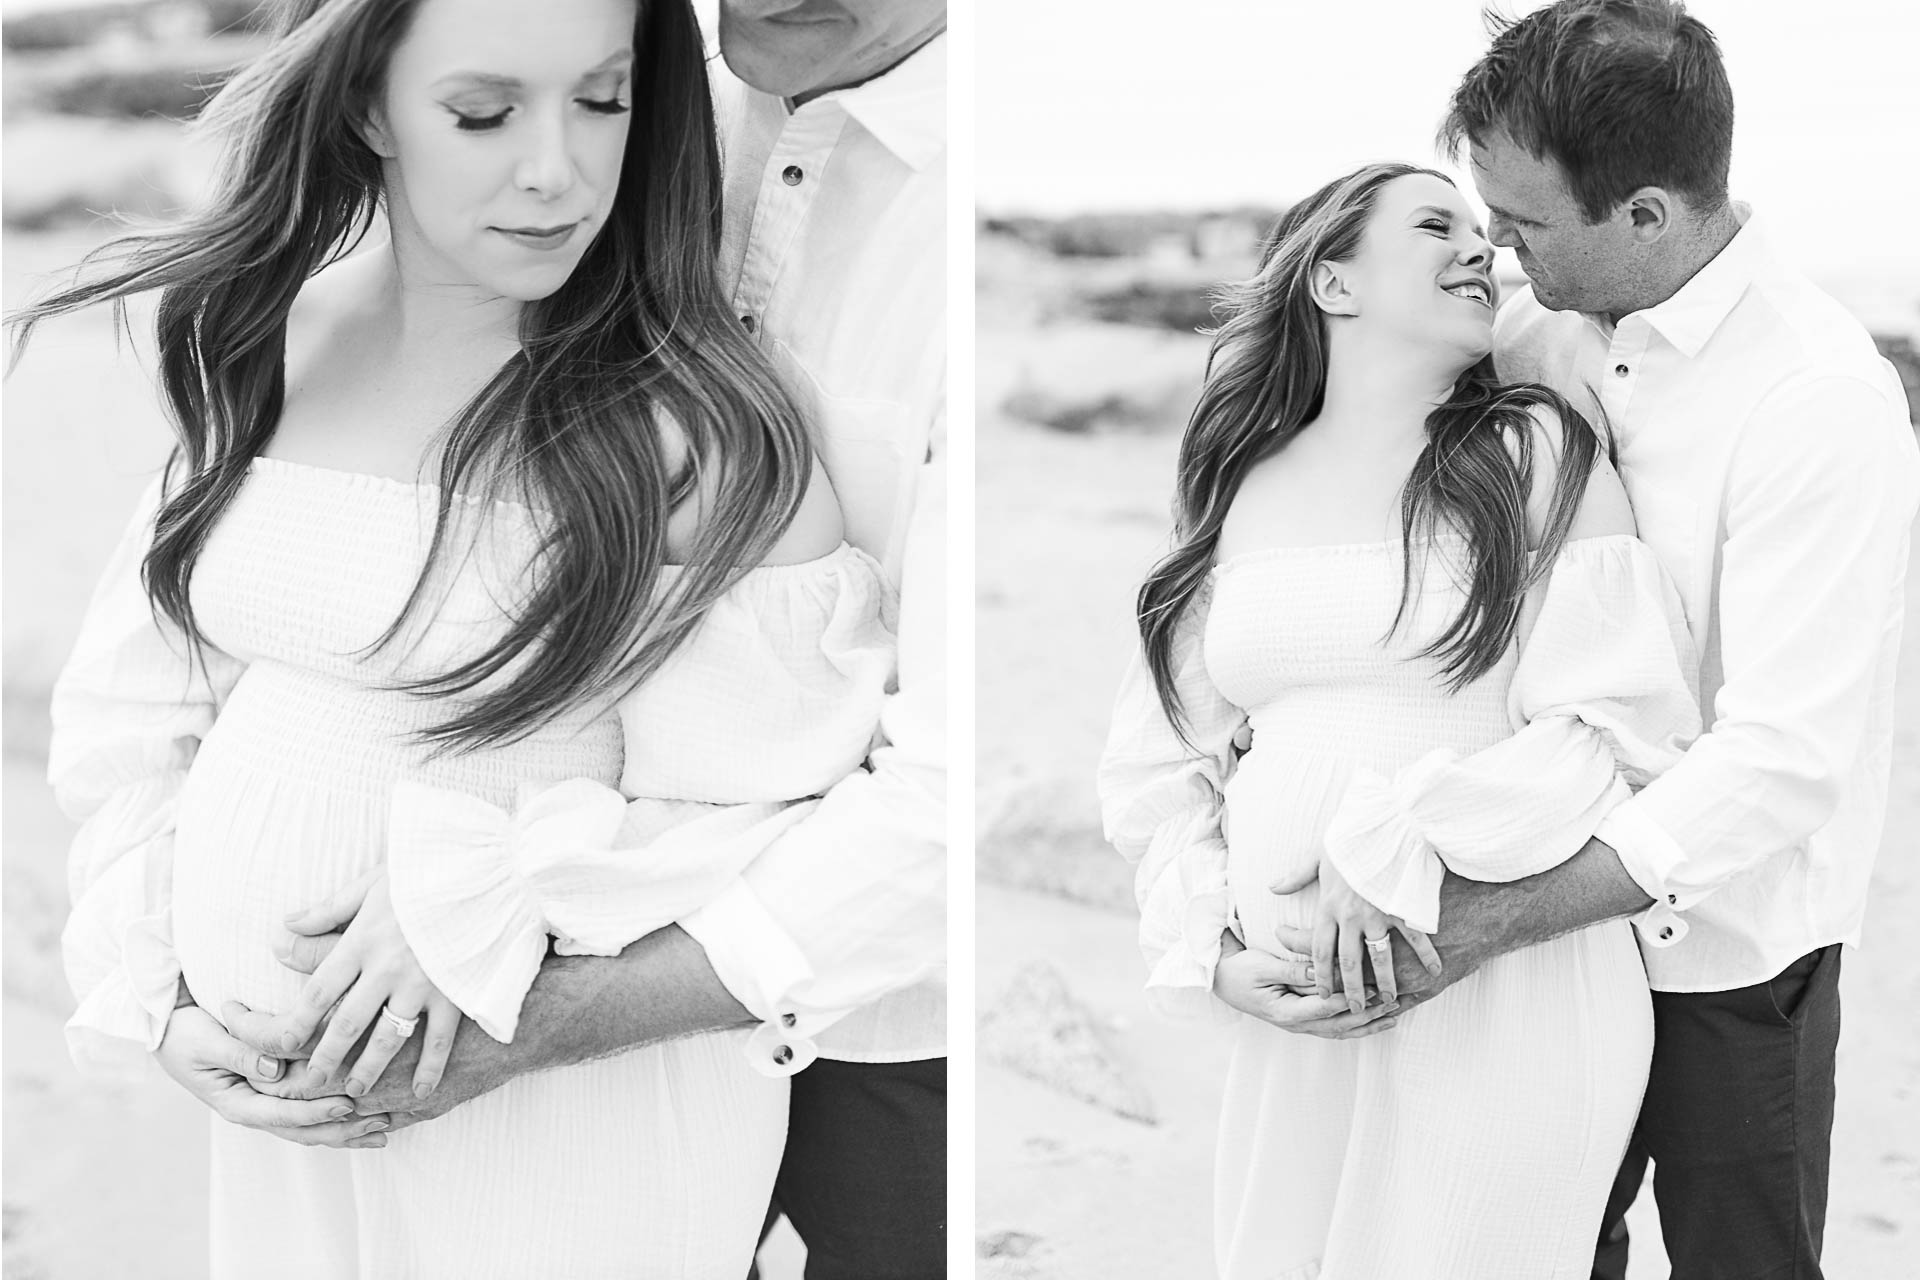 Photos by Plymouth Maternity Photographer Christina Runnals